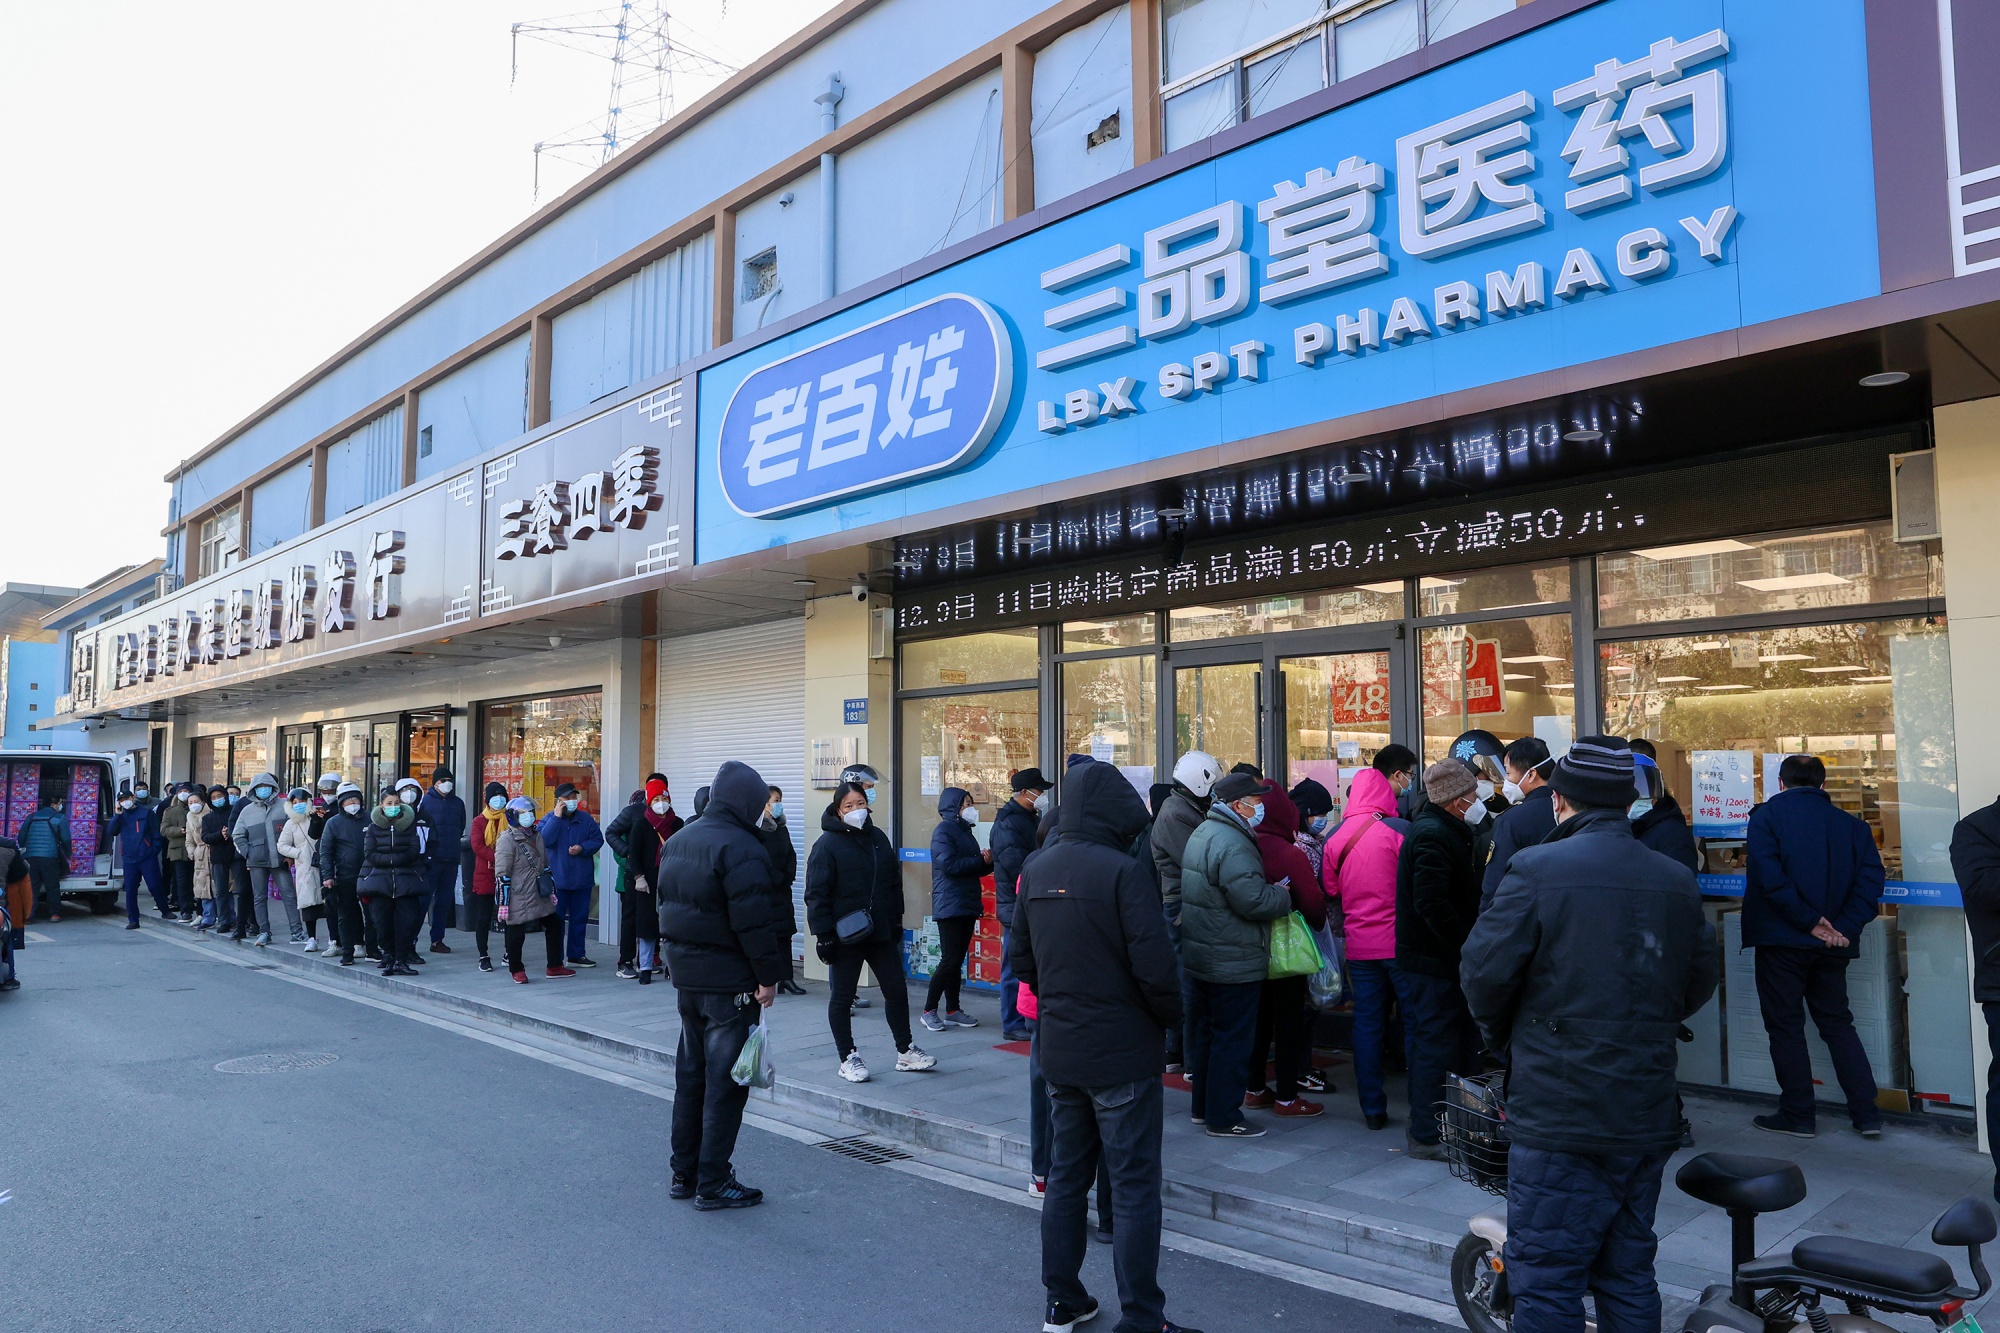 Residents line up to buy medicine at a pharmacy in Wuxi, Jiangsu province, on Dec. 24, 2022.